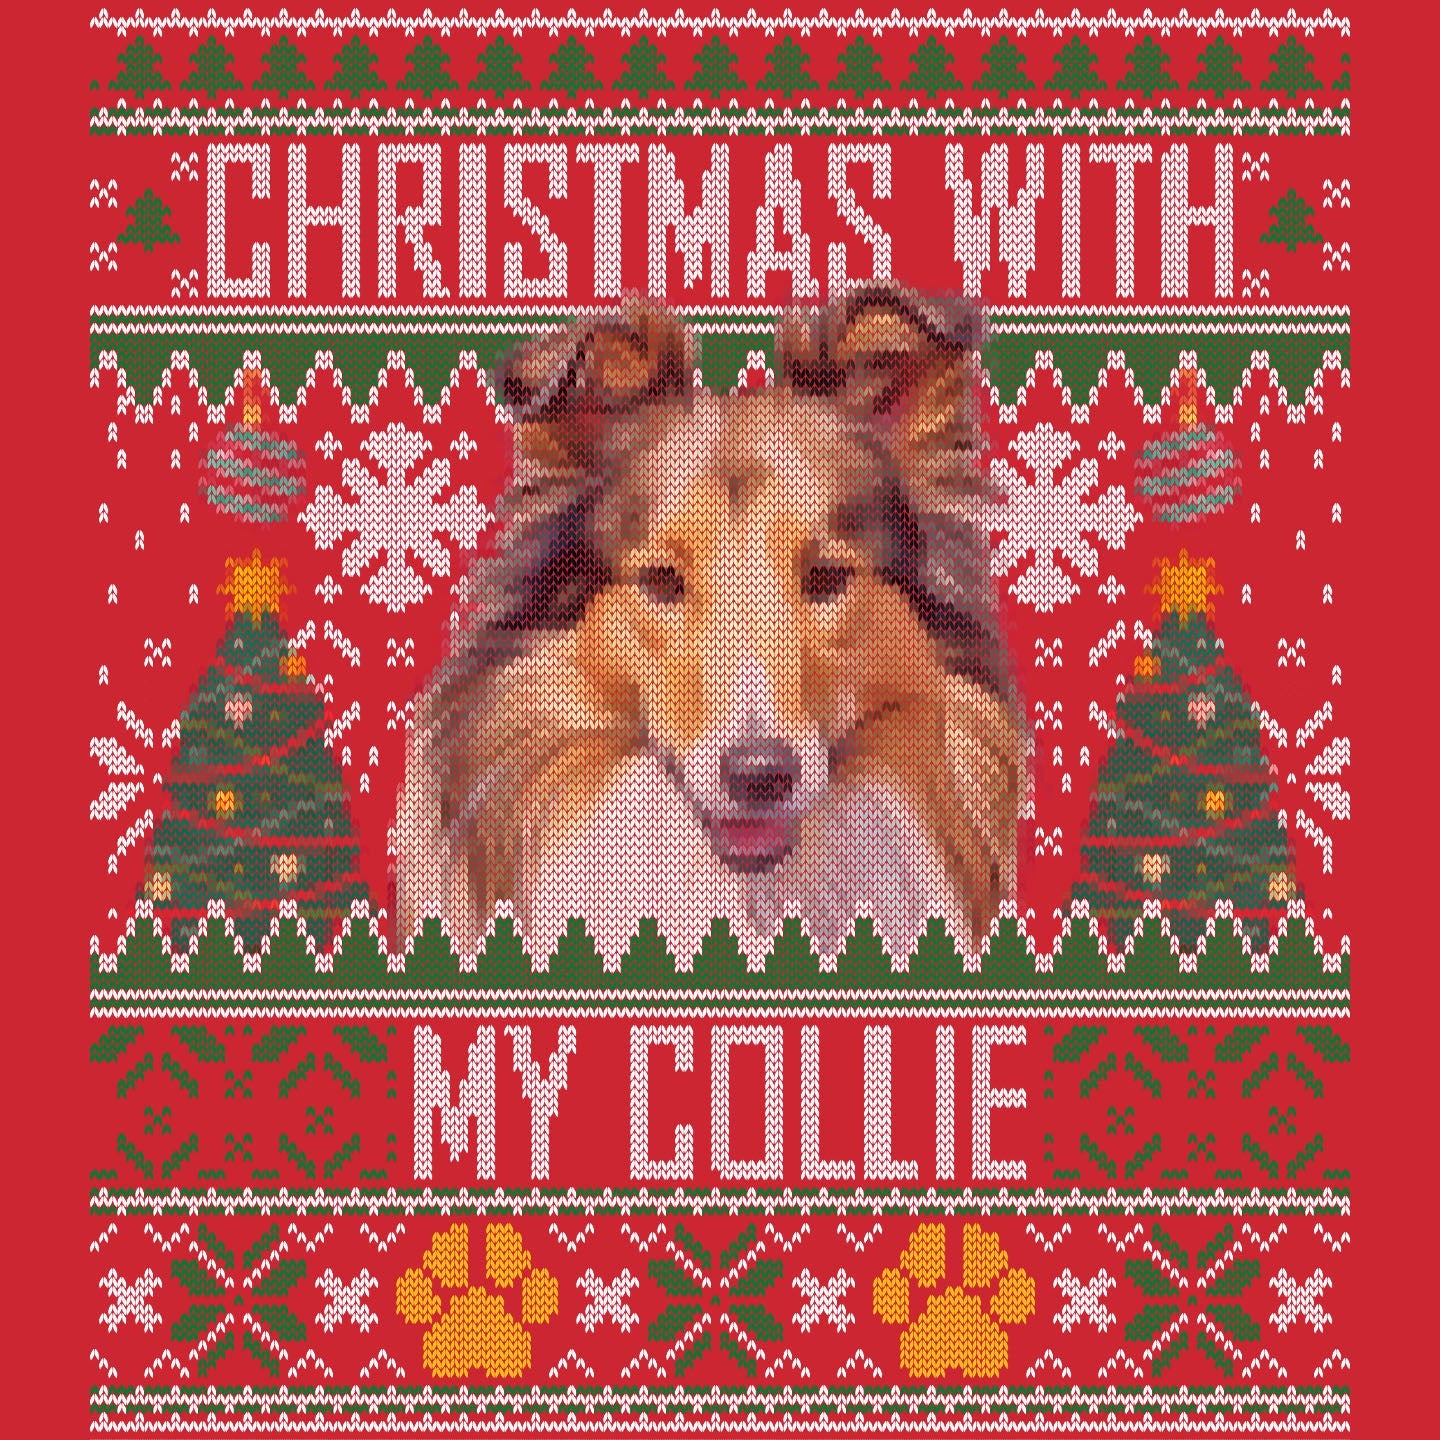 Ugly Sweater Christmas with My Collie - Adult Unisex Long Sleeve T-Shirt